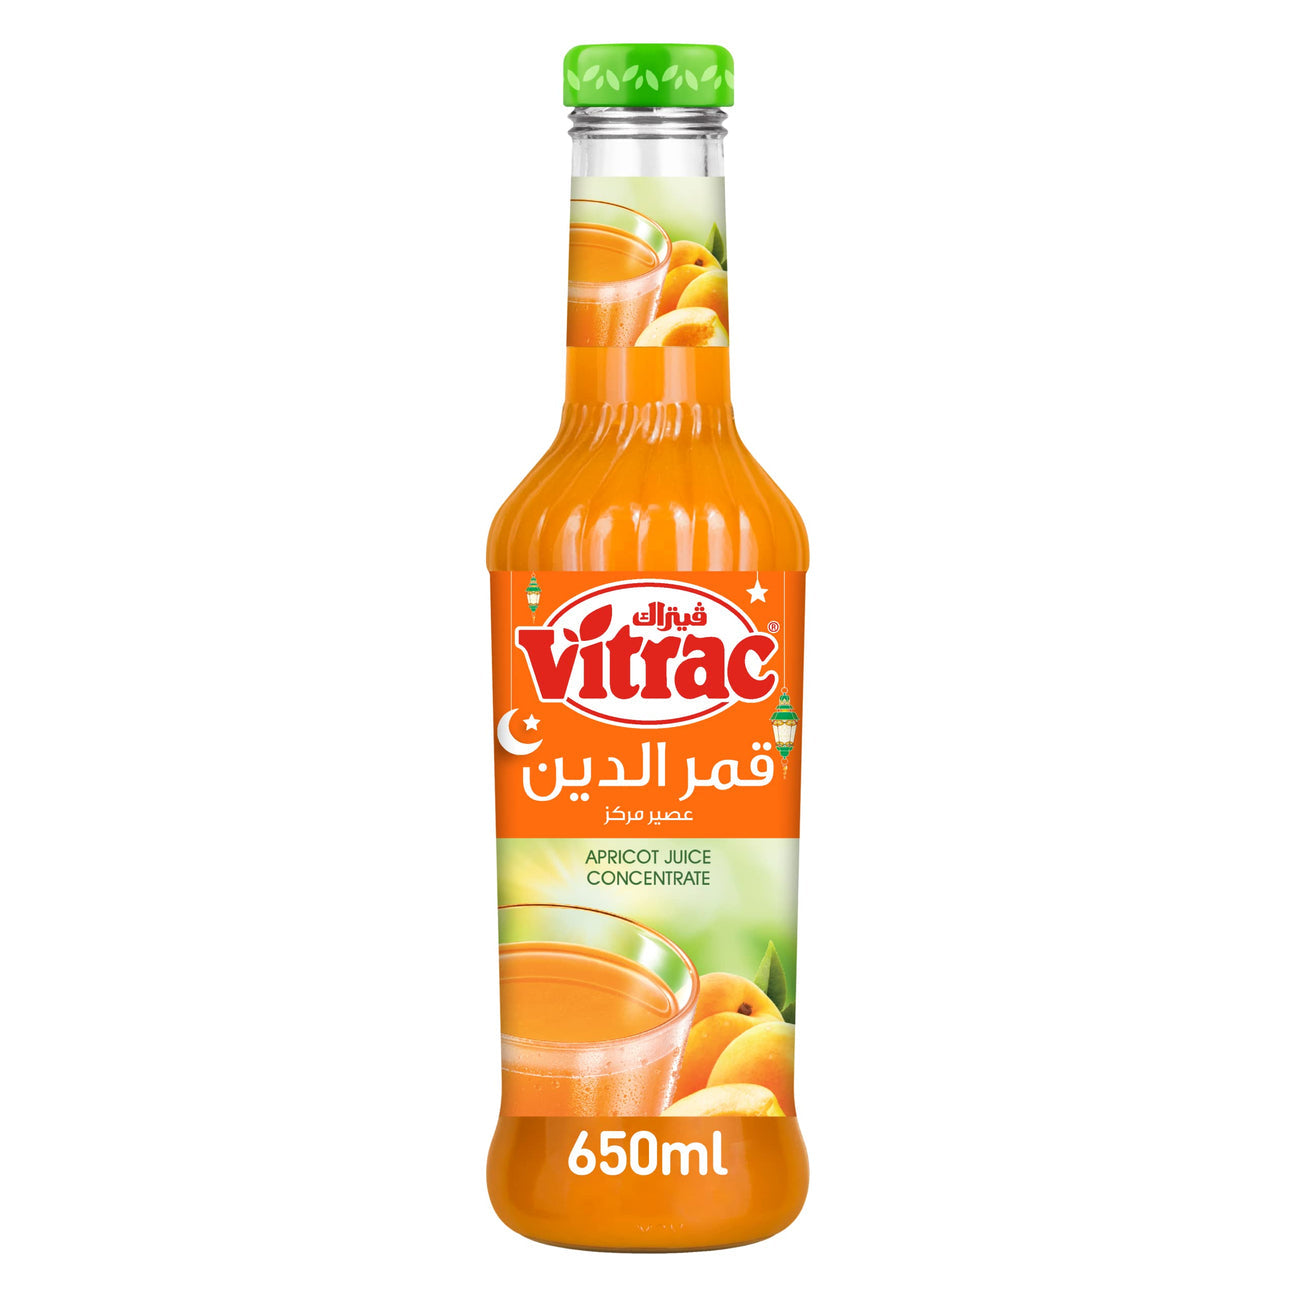 Vitrac Apricot Extract Concentrate